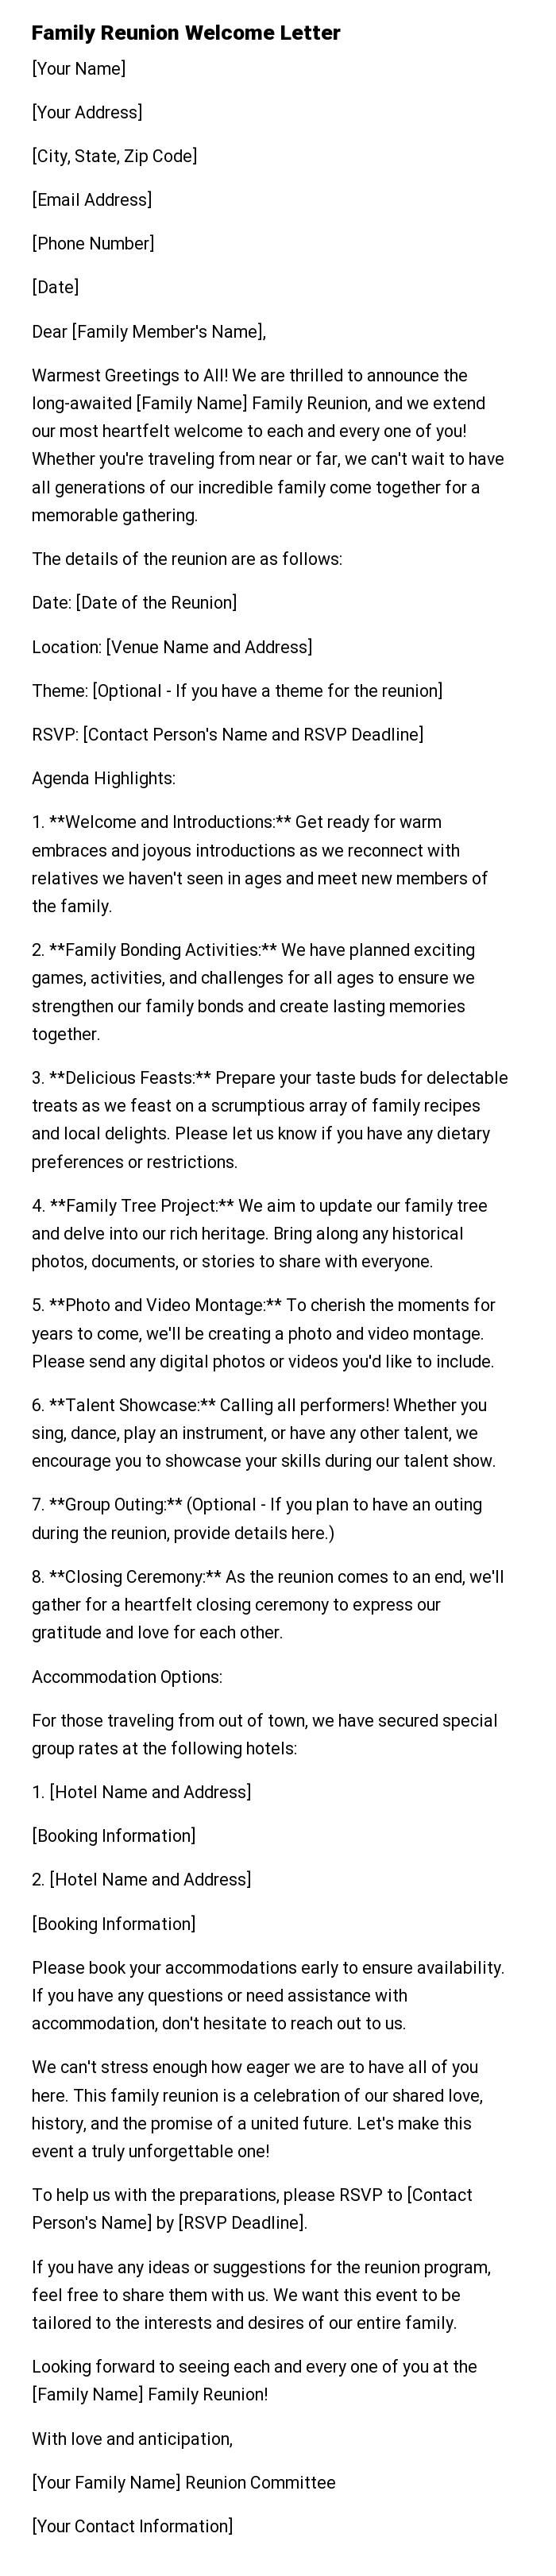 Family Reunion Welcome Letter